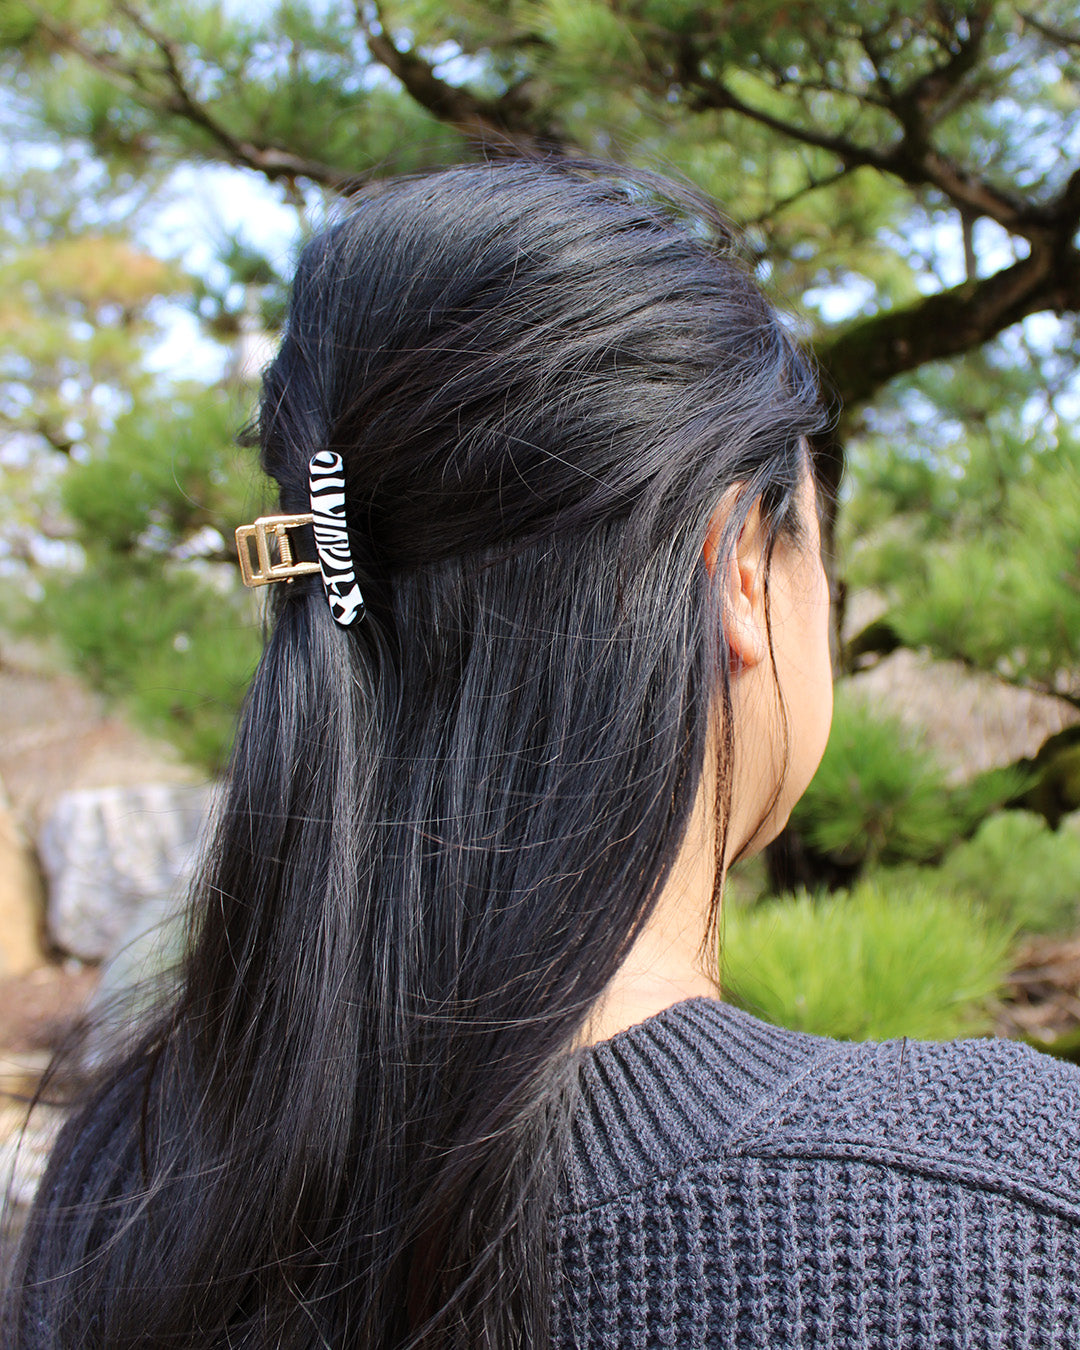 person with black hair wearing black and white claw hair holding half her hair up.